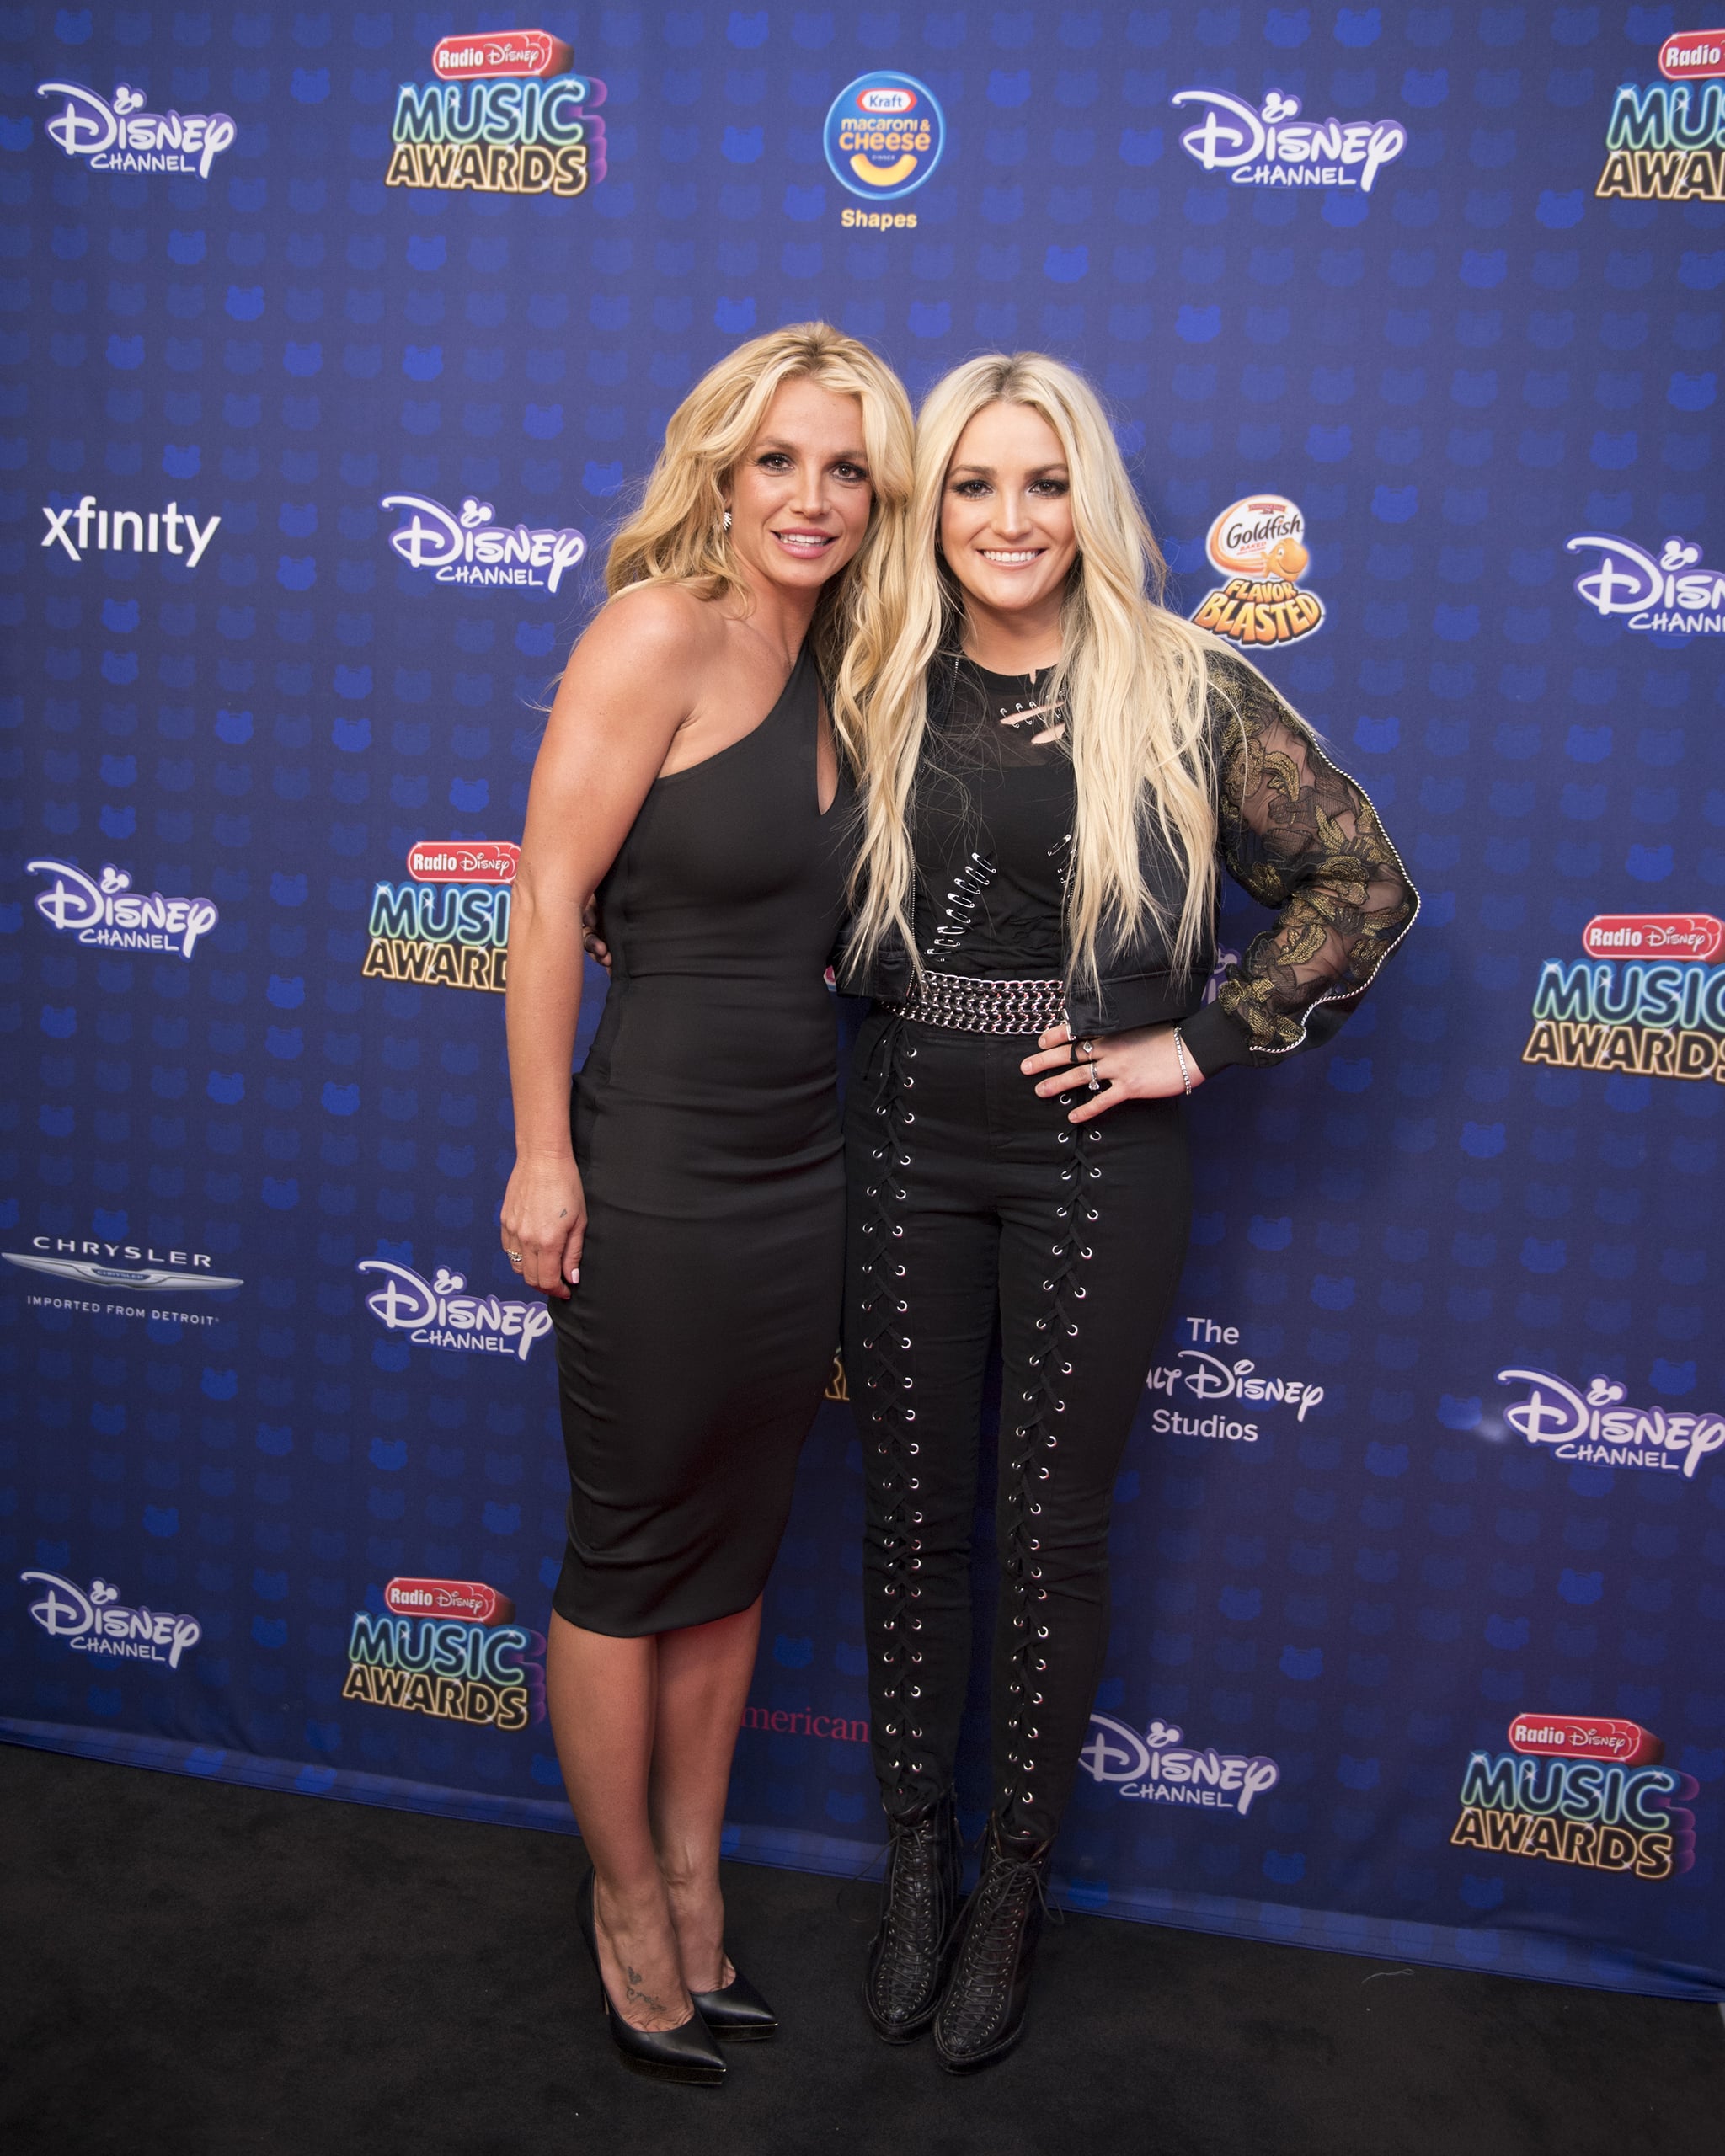 DISNEY CHANNEL PRESENTS THE RADIO DISNEY MUSIC AWARDS 2017 - Entertainment's brightest young stars performed on Saturday 29th 